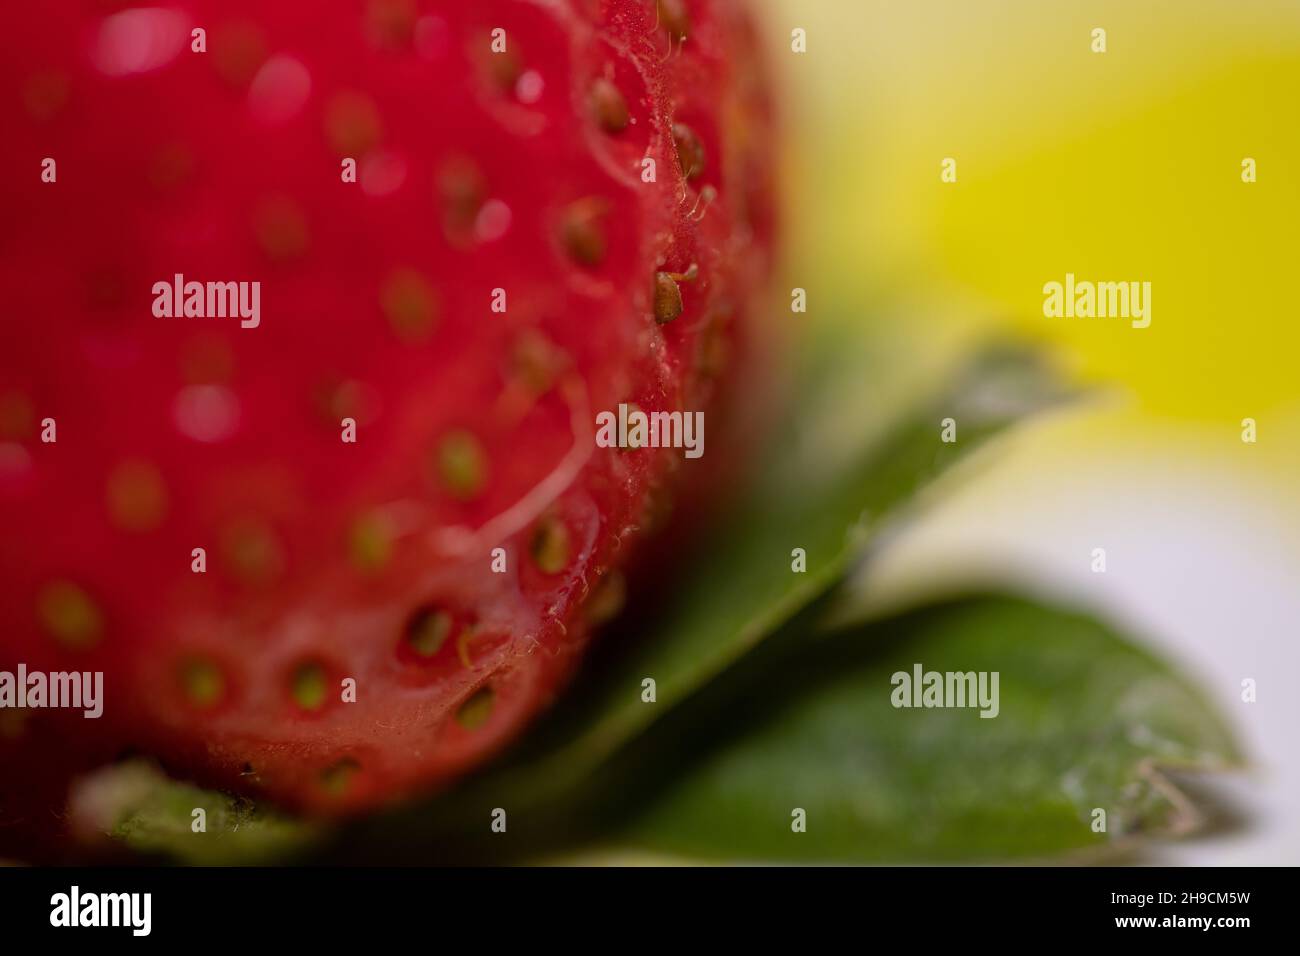 Close up of a strawberry Stock Photo